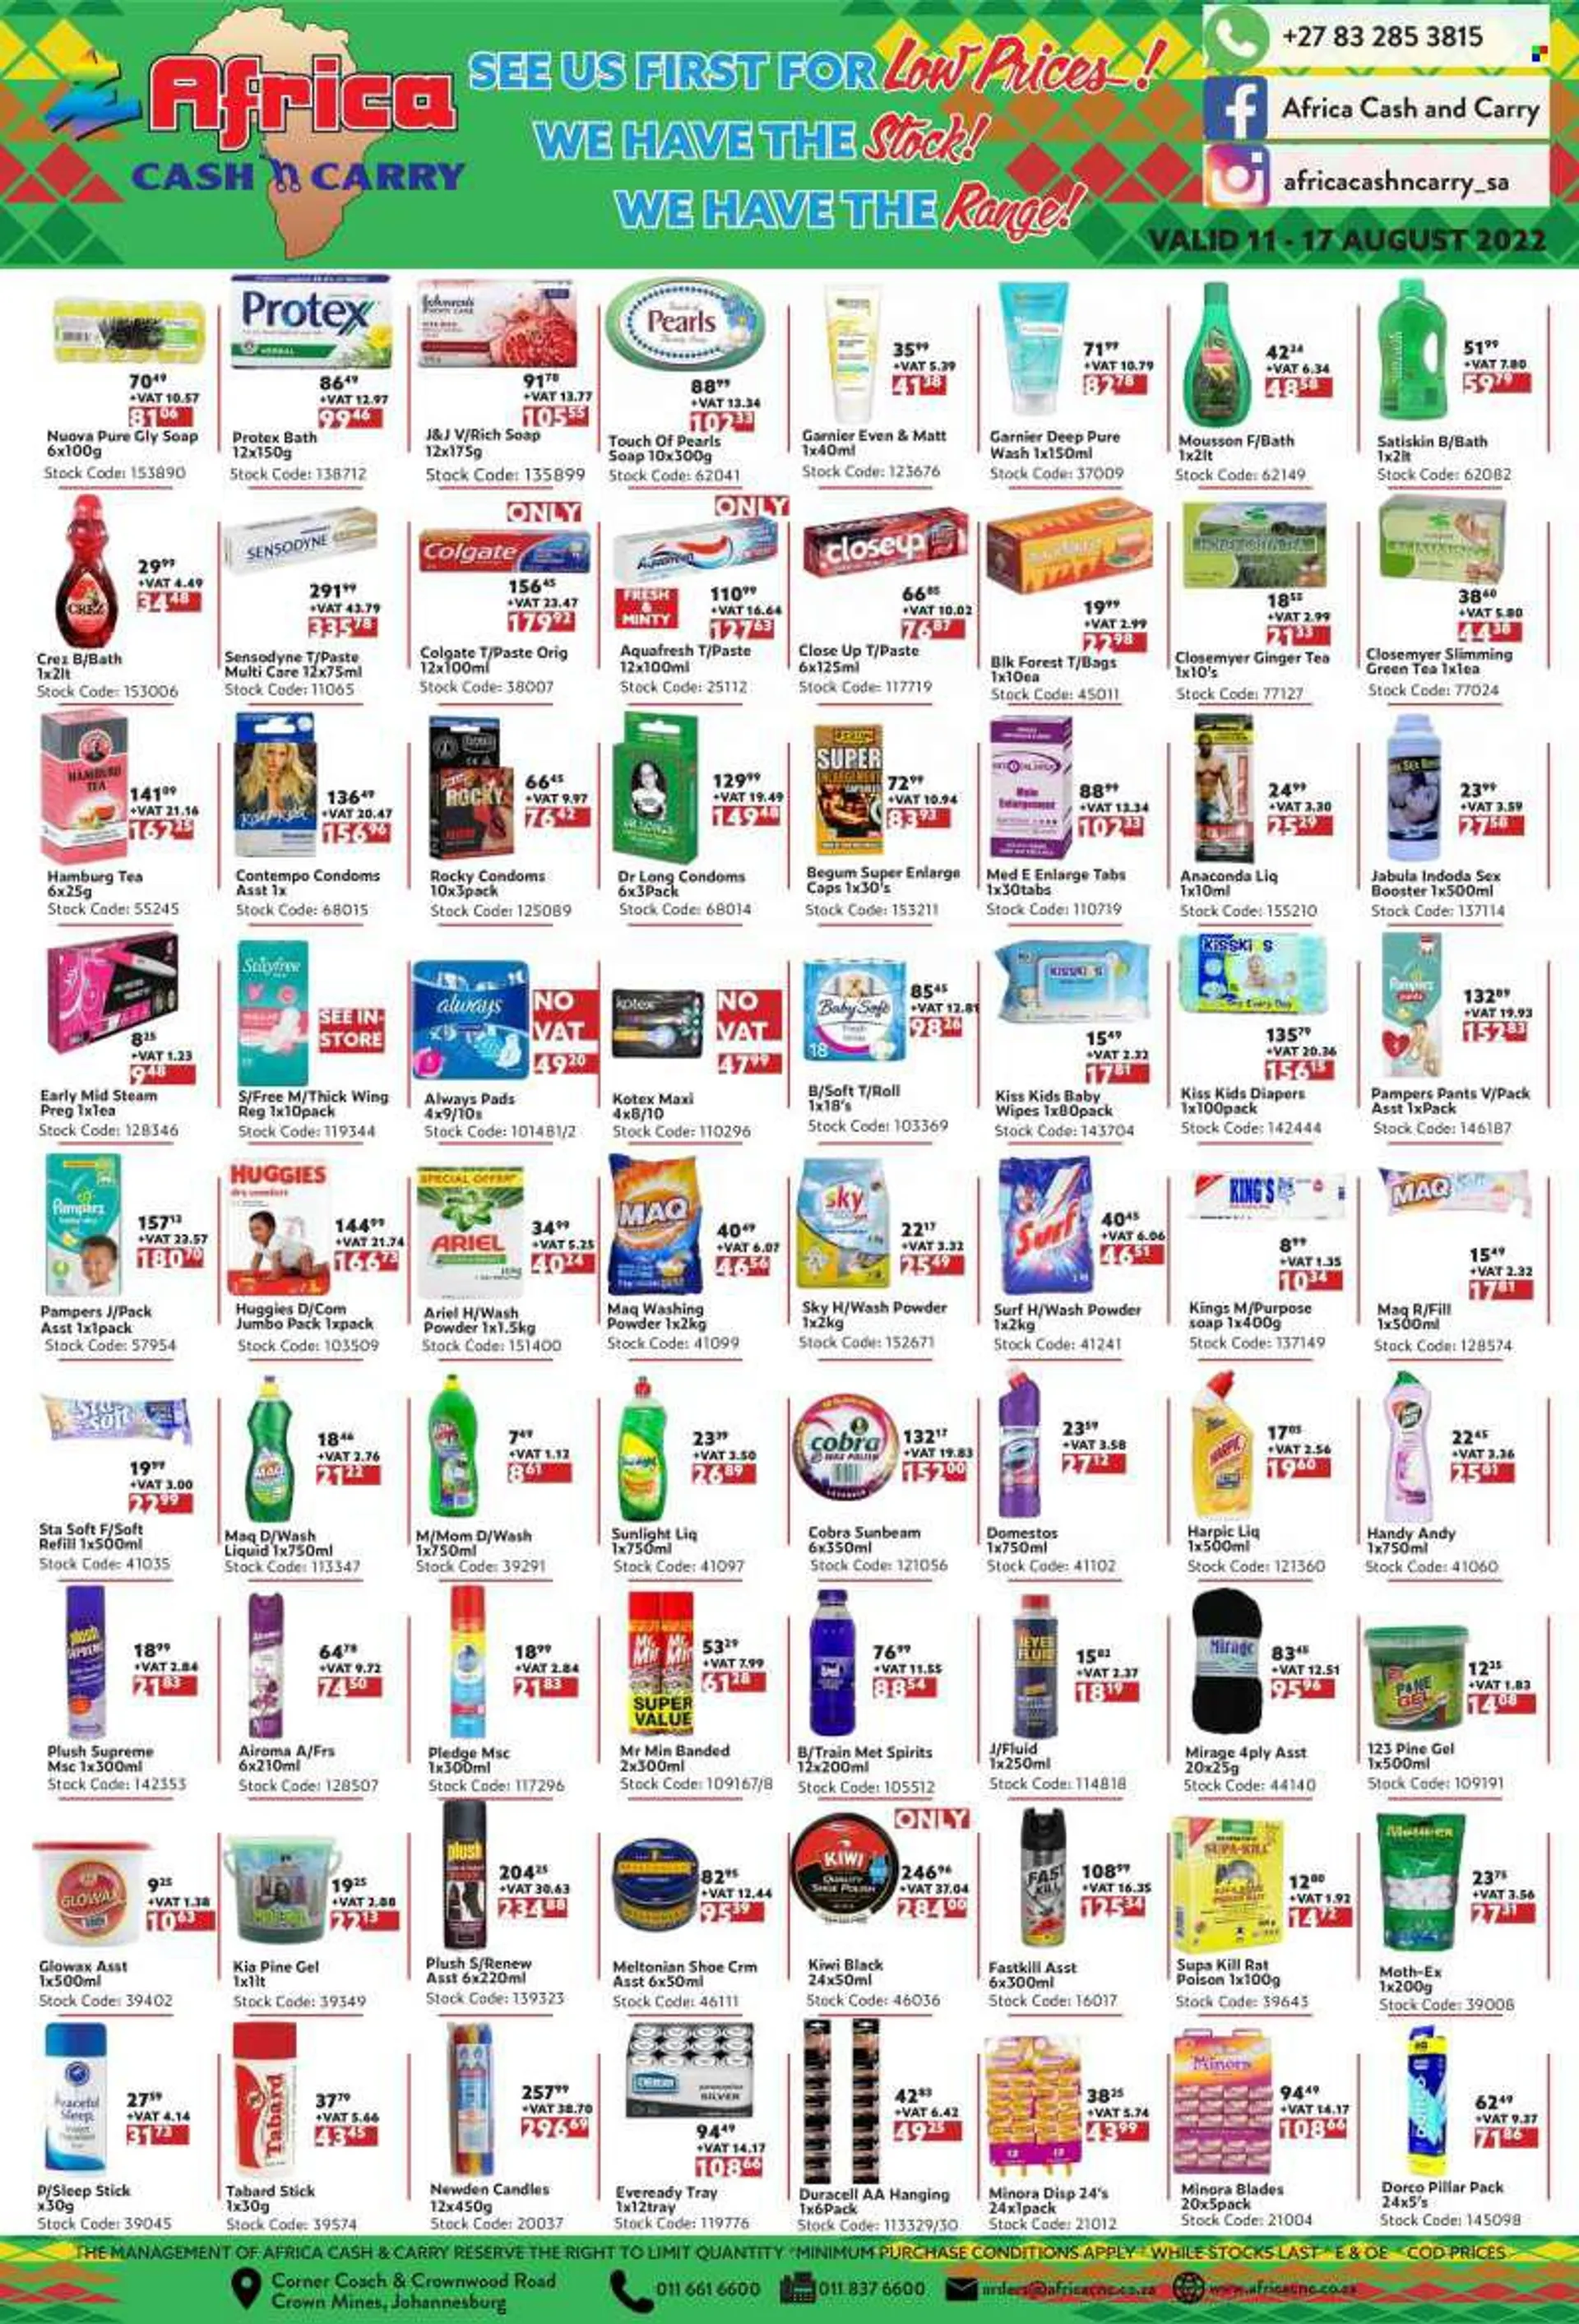 Africa Cash &amp; Carry catalogue  - 11/08/2022 - 17/08/2022 - Sales products - kiwi, cod, green tea, tea, wipes, Huggies, Pampers, pants, baby wipes, nappies, Domestos, Harpic, Pledge, Ariel, laundry powder, Sunlight, Surf, Protex, Mousson, Satiskin, soa